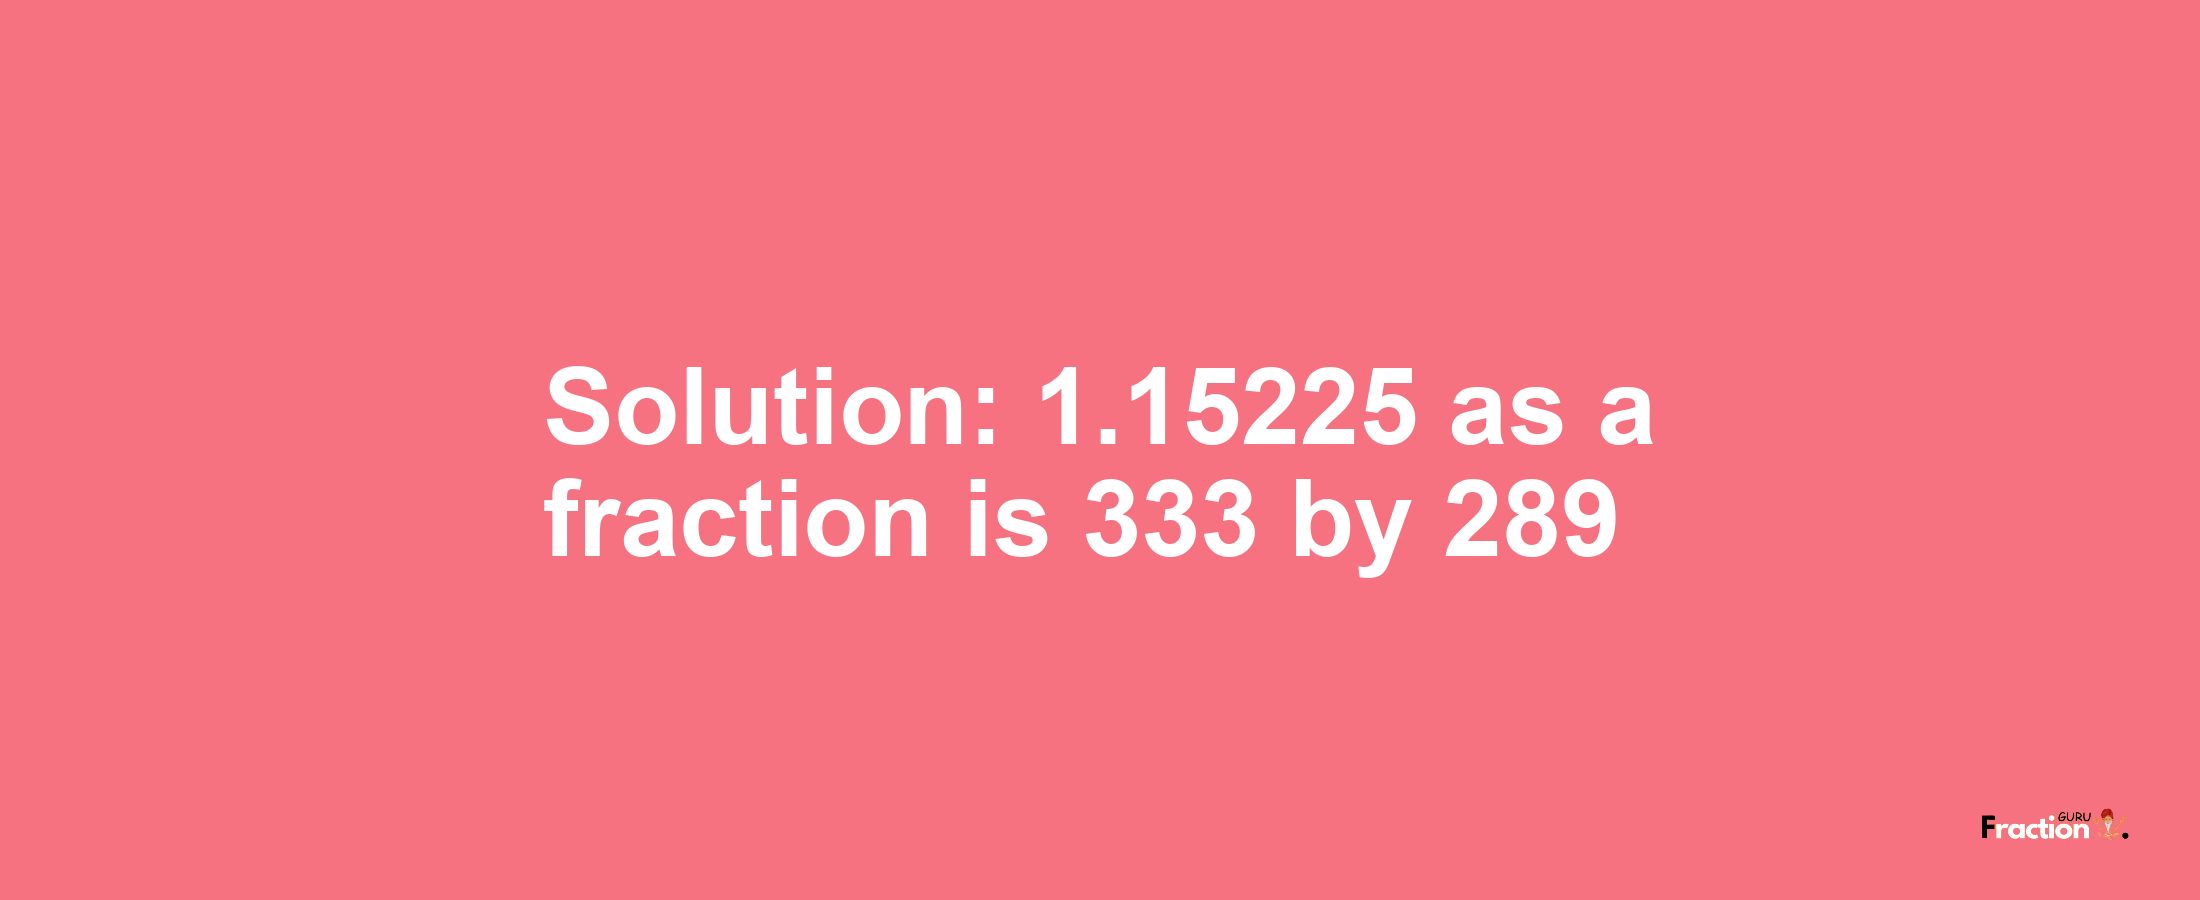 Solution:1.15225 as a fraction is 333/289